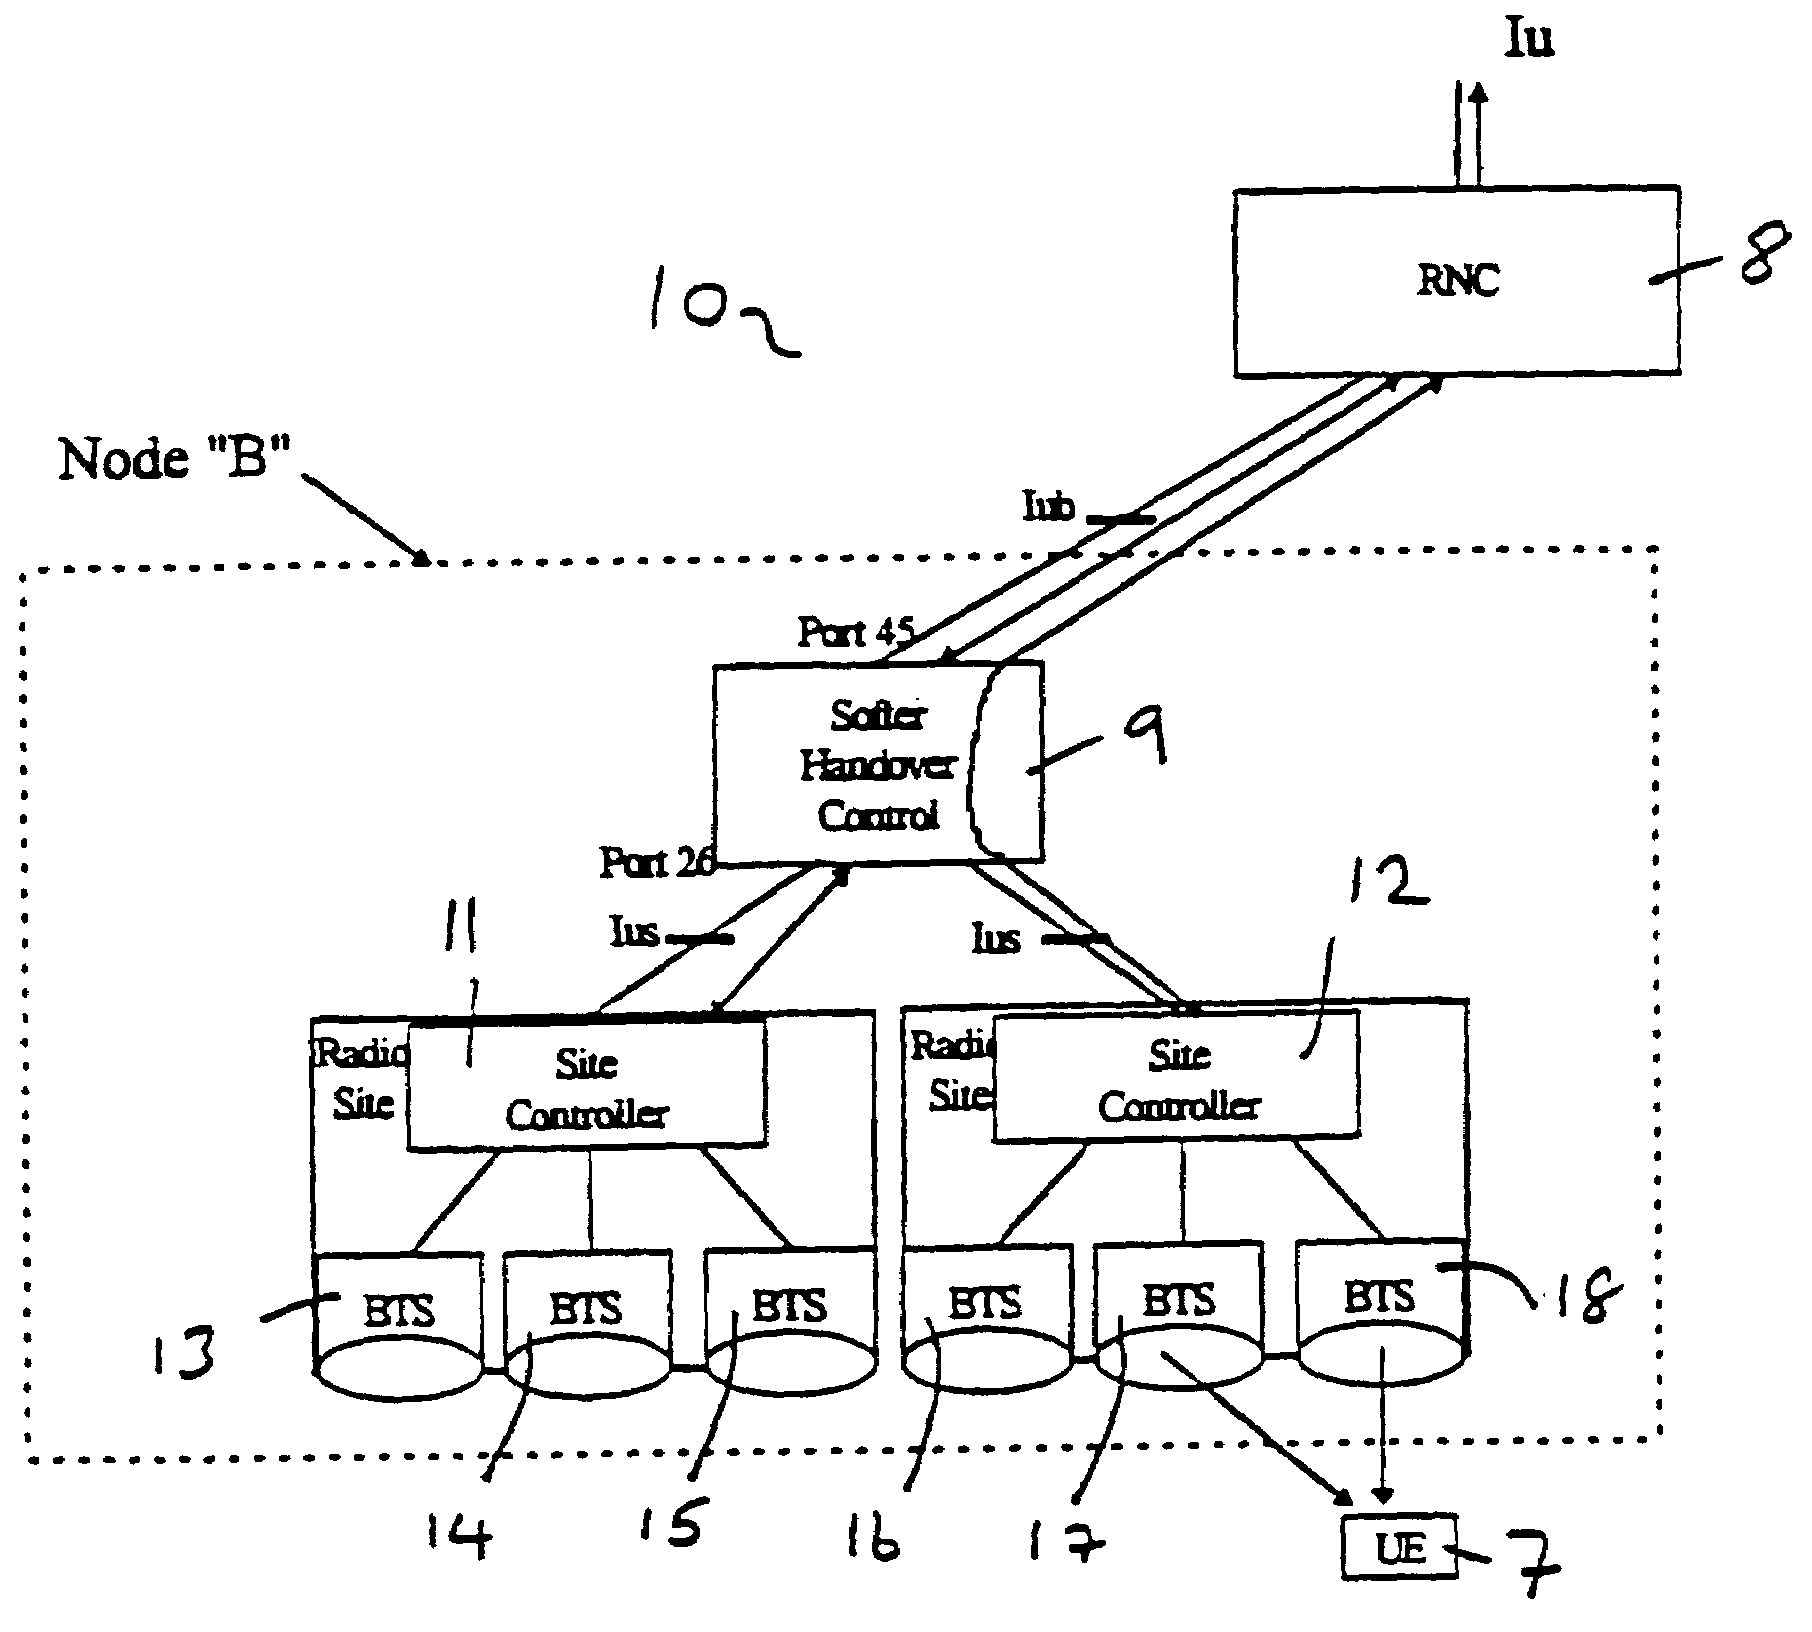 Method and apparatus for changing radio link configurations in a mobile telecommunications system with soft handover